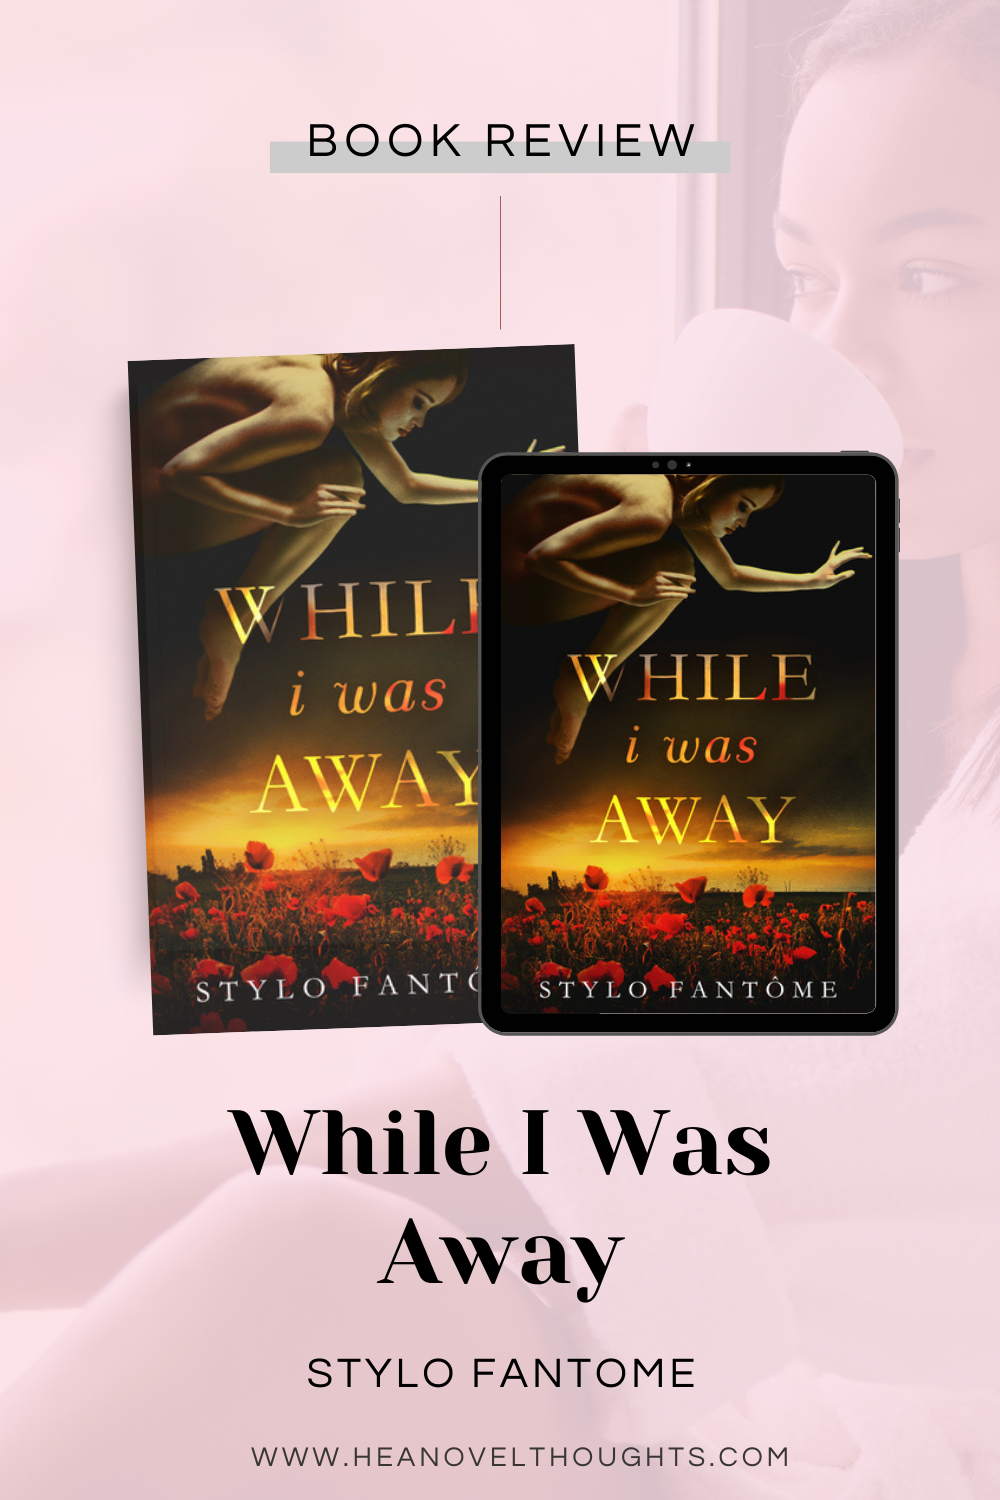 While I Was Away by Stylo Fantome